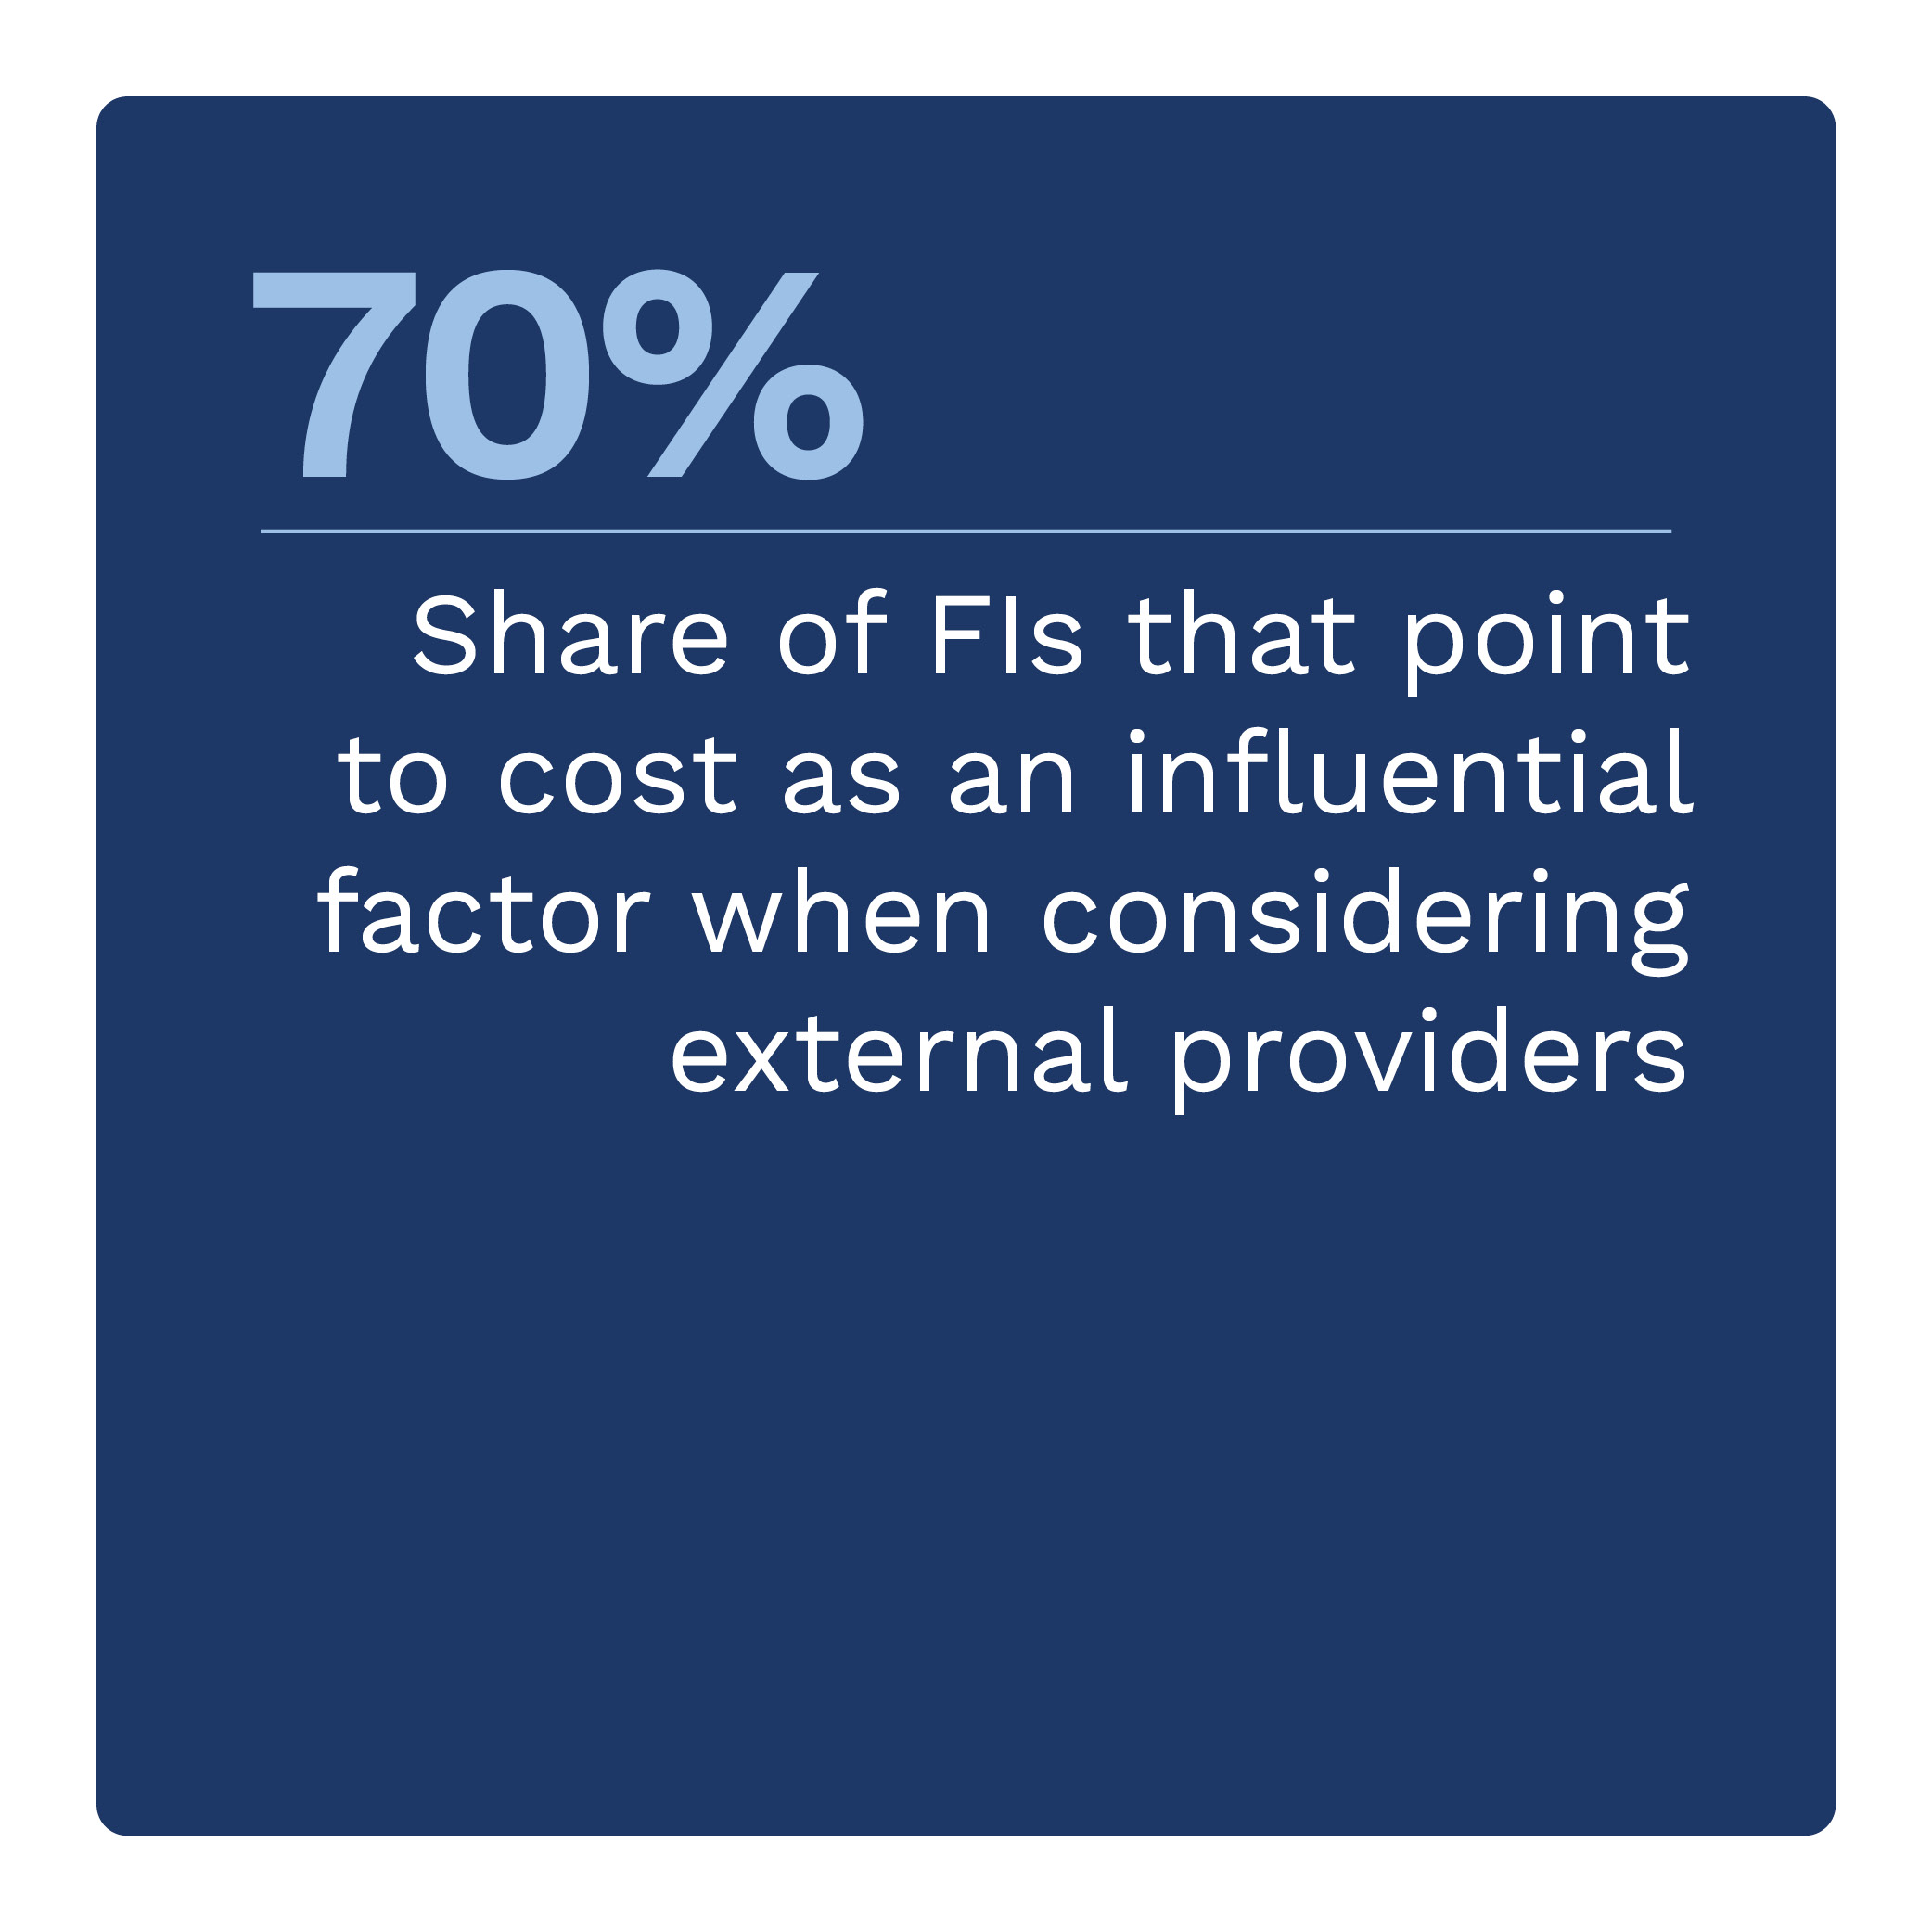 70%: Share of FIs that point to cost as an influential factor when considering external providers